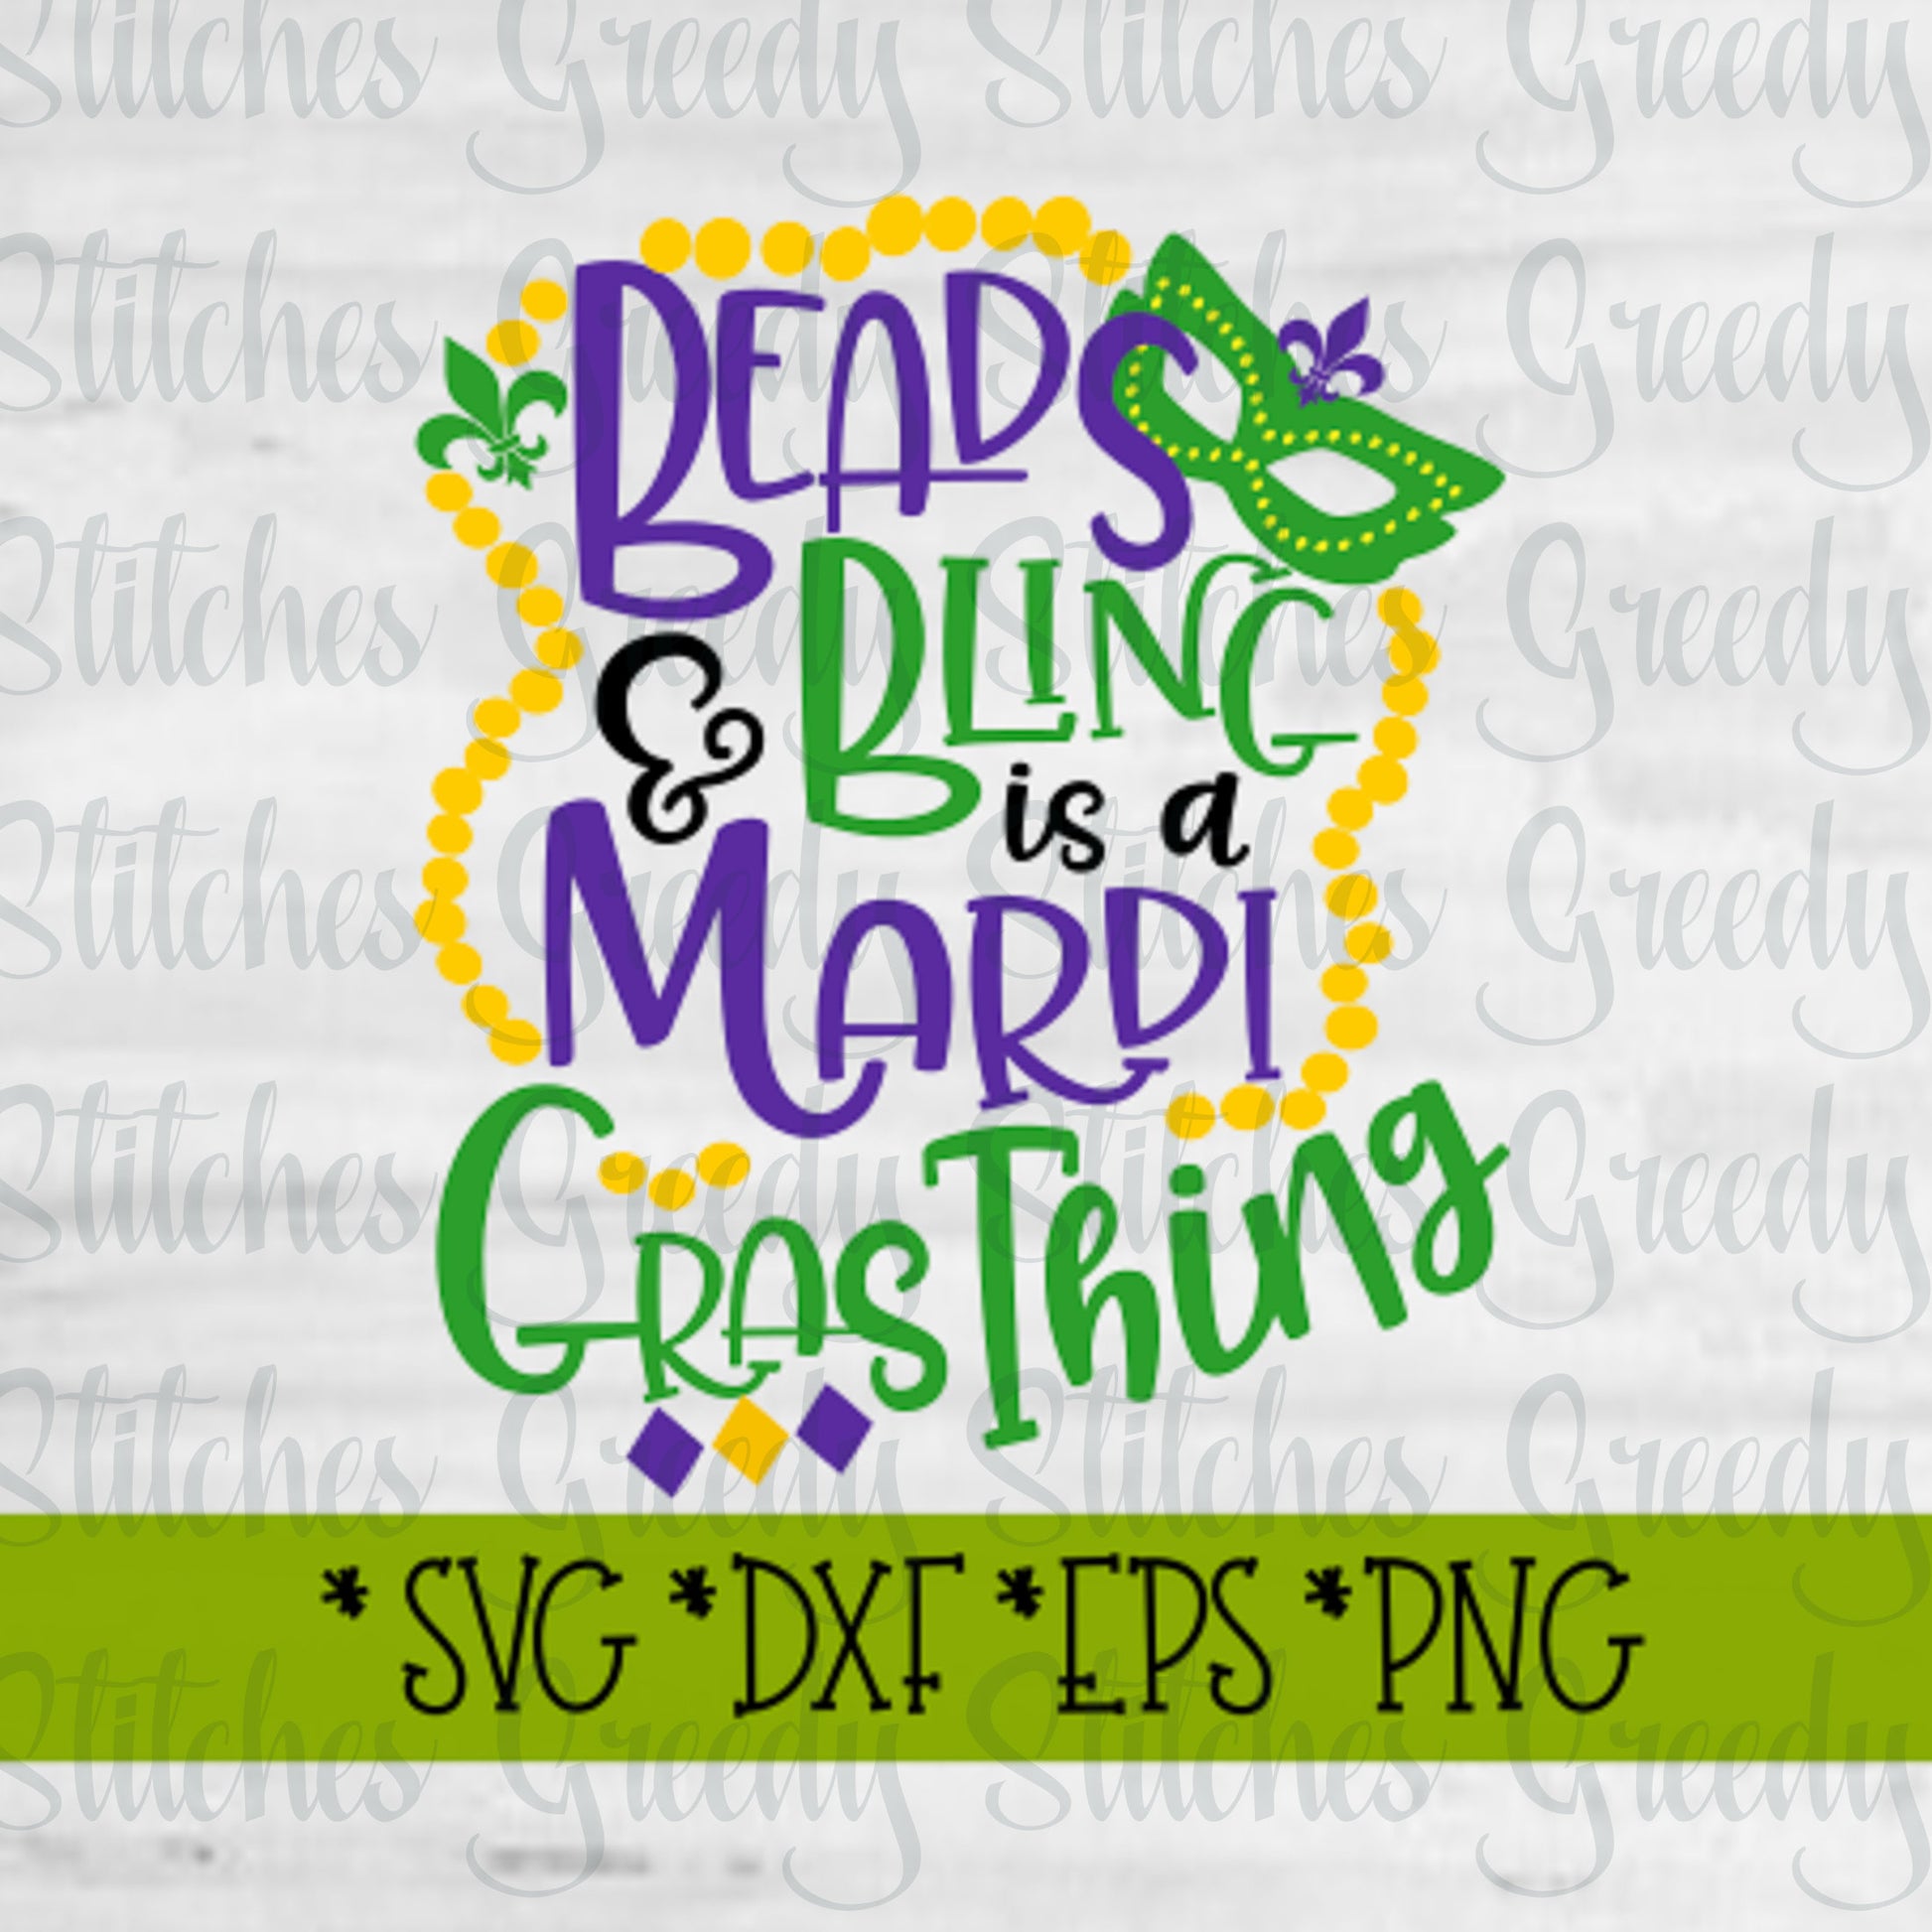 Bead and Bling Is A Mardi Gras Thing svg, dxf, eps, png. Parade | Beads SvG | Mardi Gras SvG | Beads & Bling SvG | Instant Download Cut File